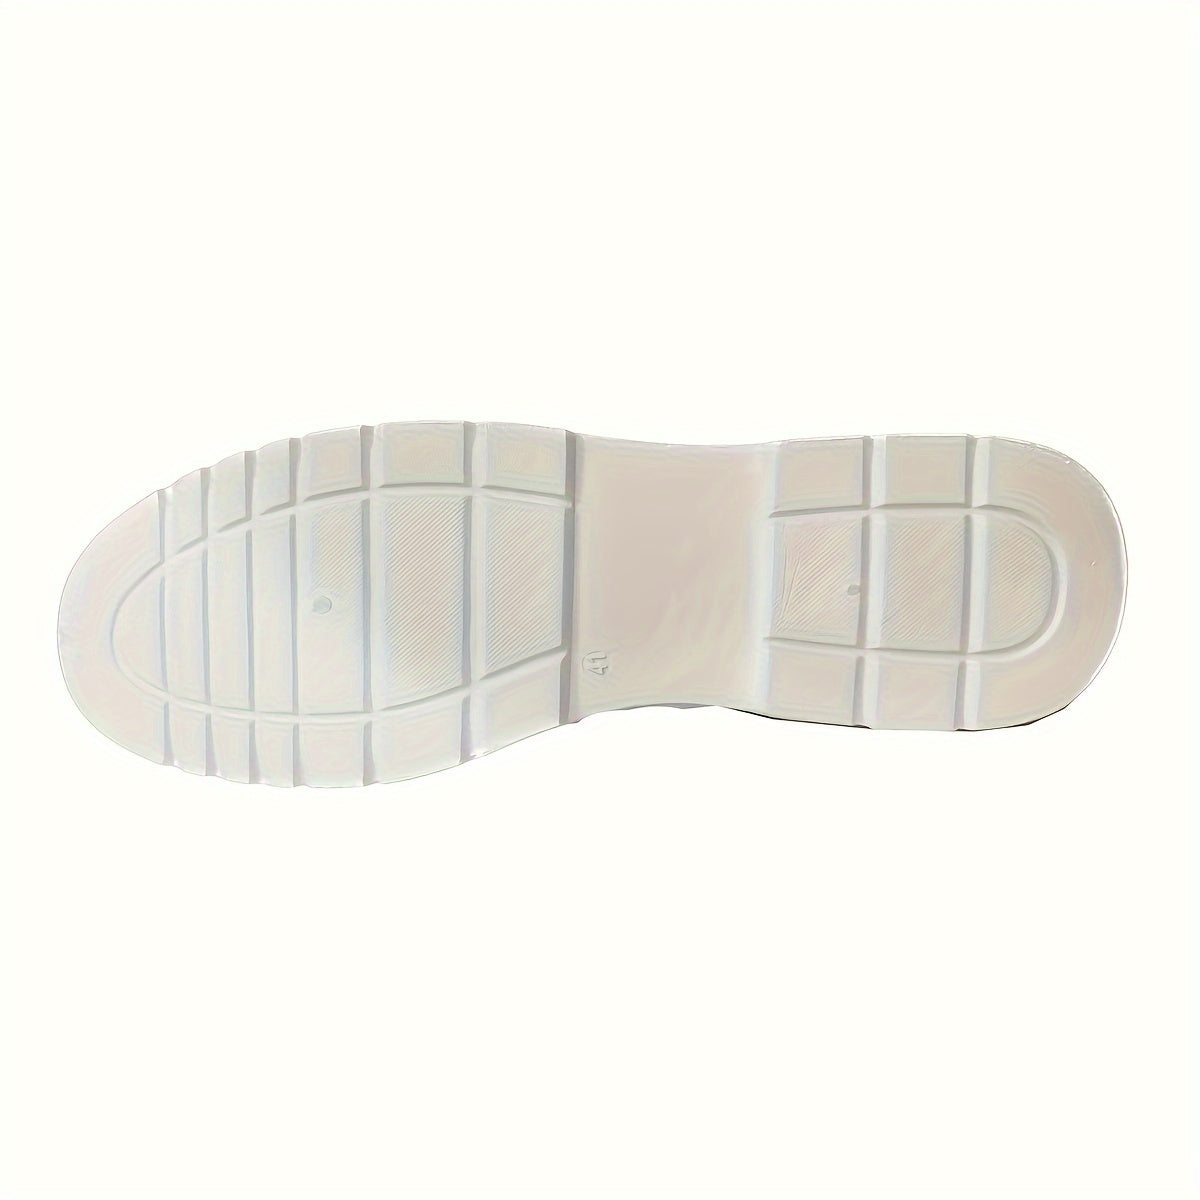 DAWSRi Men's Casual Shoes with geometric pattern and elastic band closure, showcasing comfort and style for all seasons